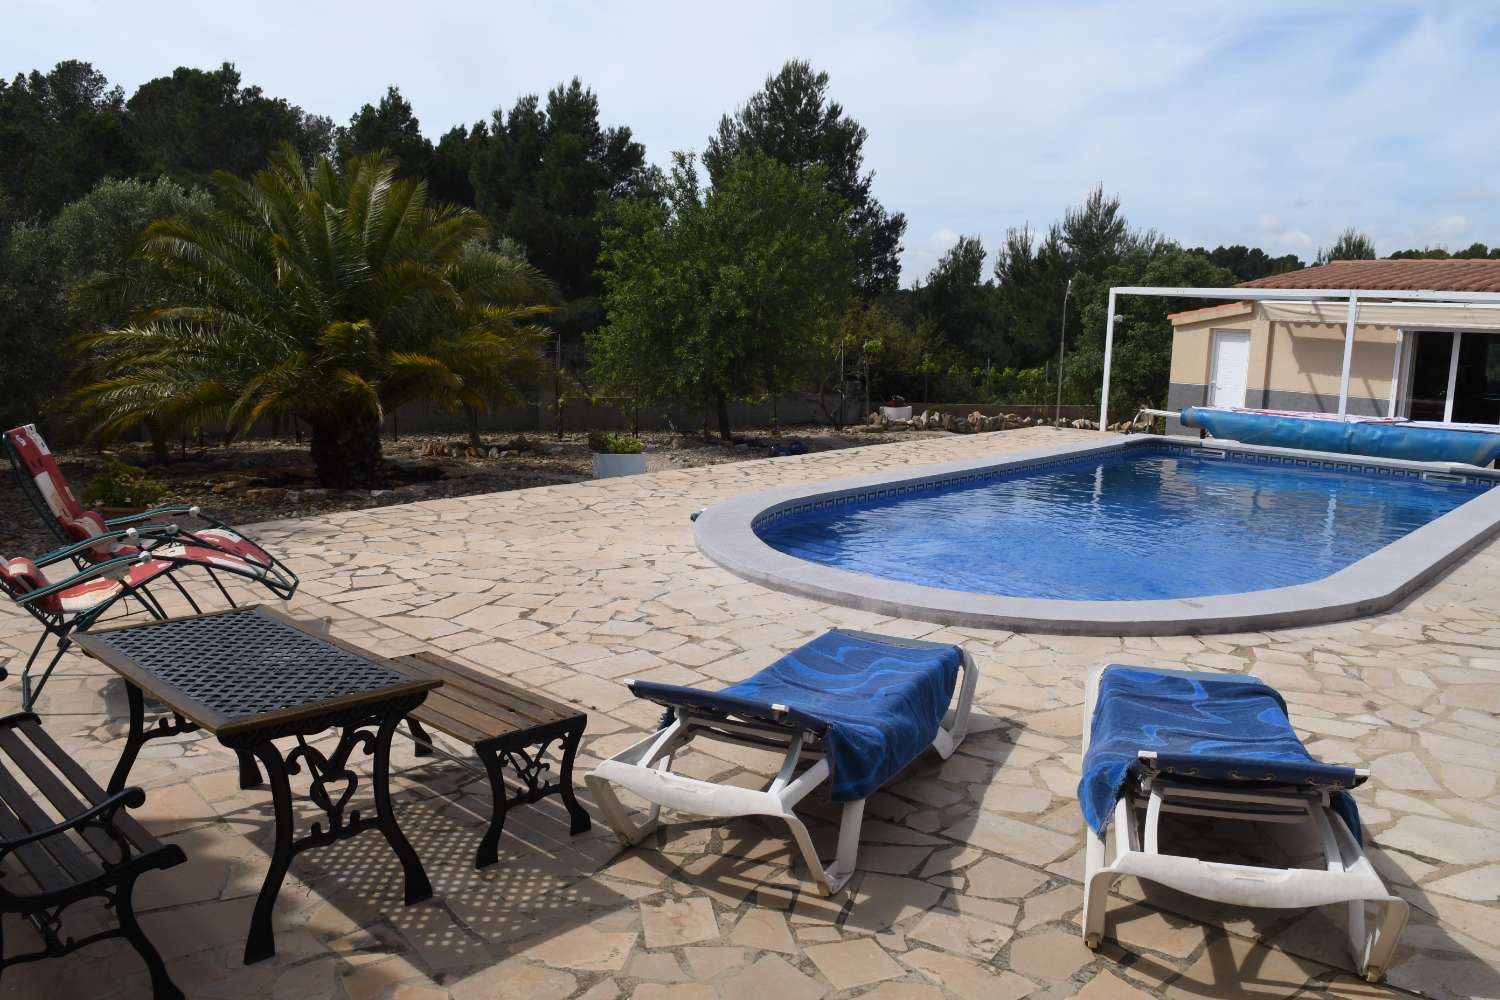 YOU LIKE TRANQUILITY! Property in the middle of nature just 10 minutes from the beach!